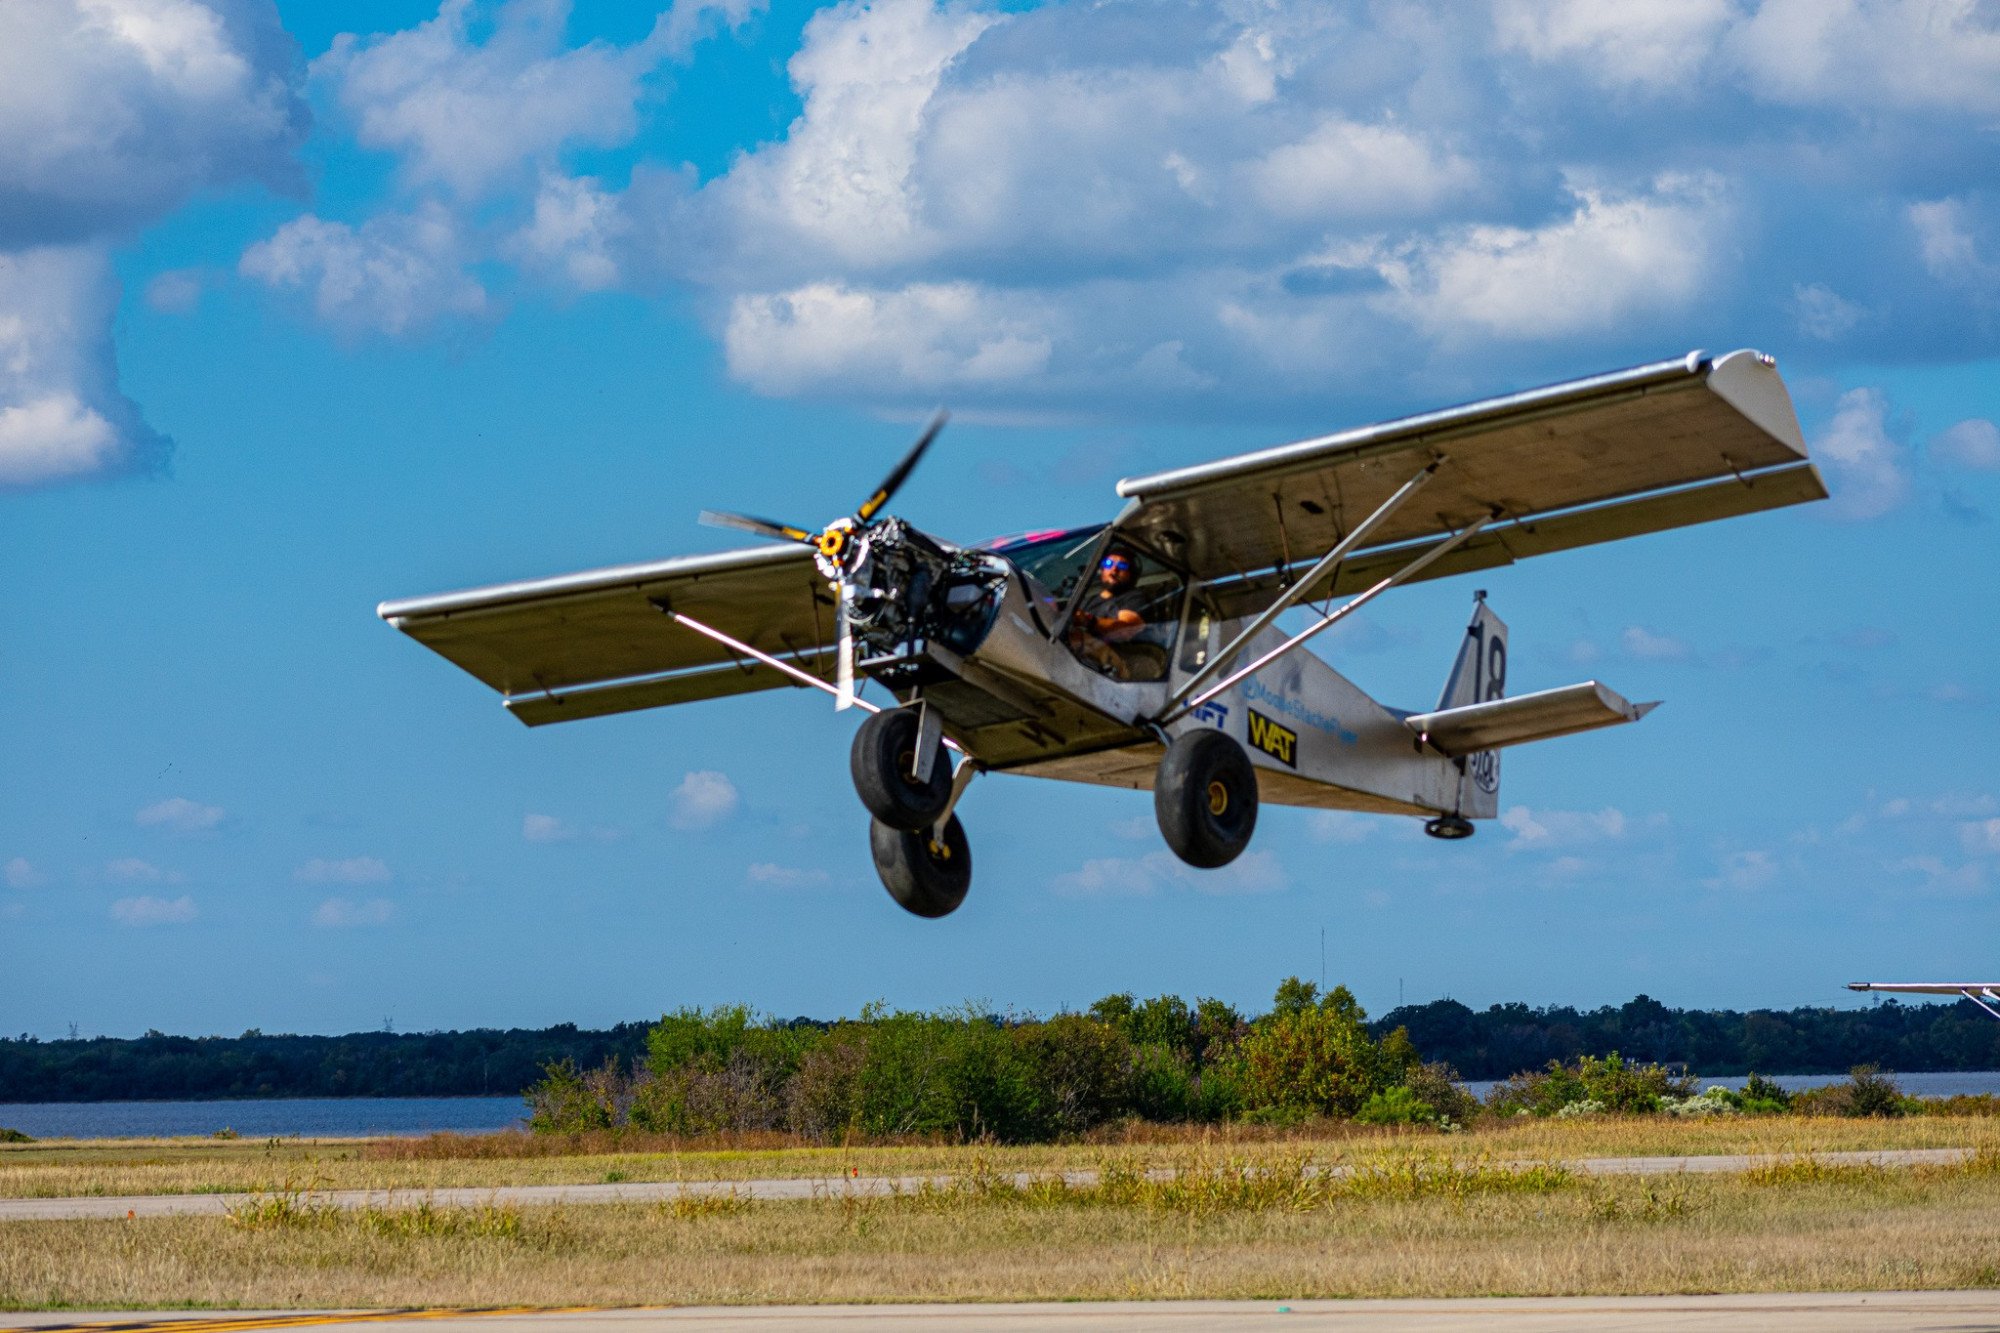 Justin "MoosestacheFlyer" Tisdale coming in on final in his #18 Zenith 750-STOL